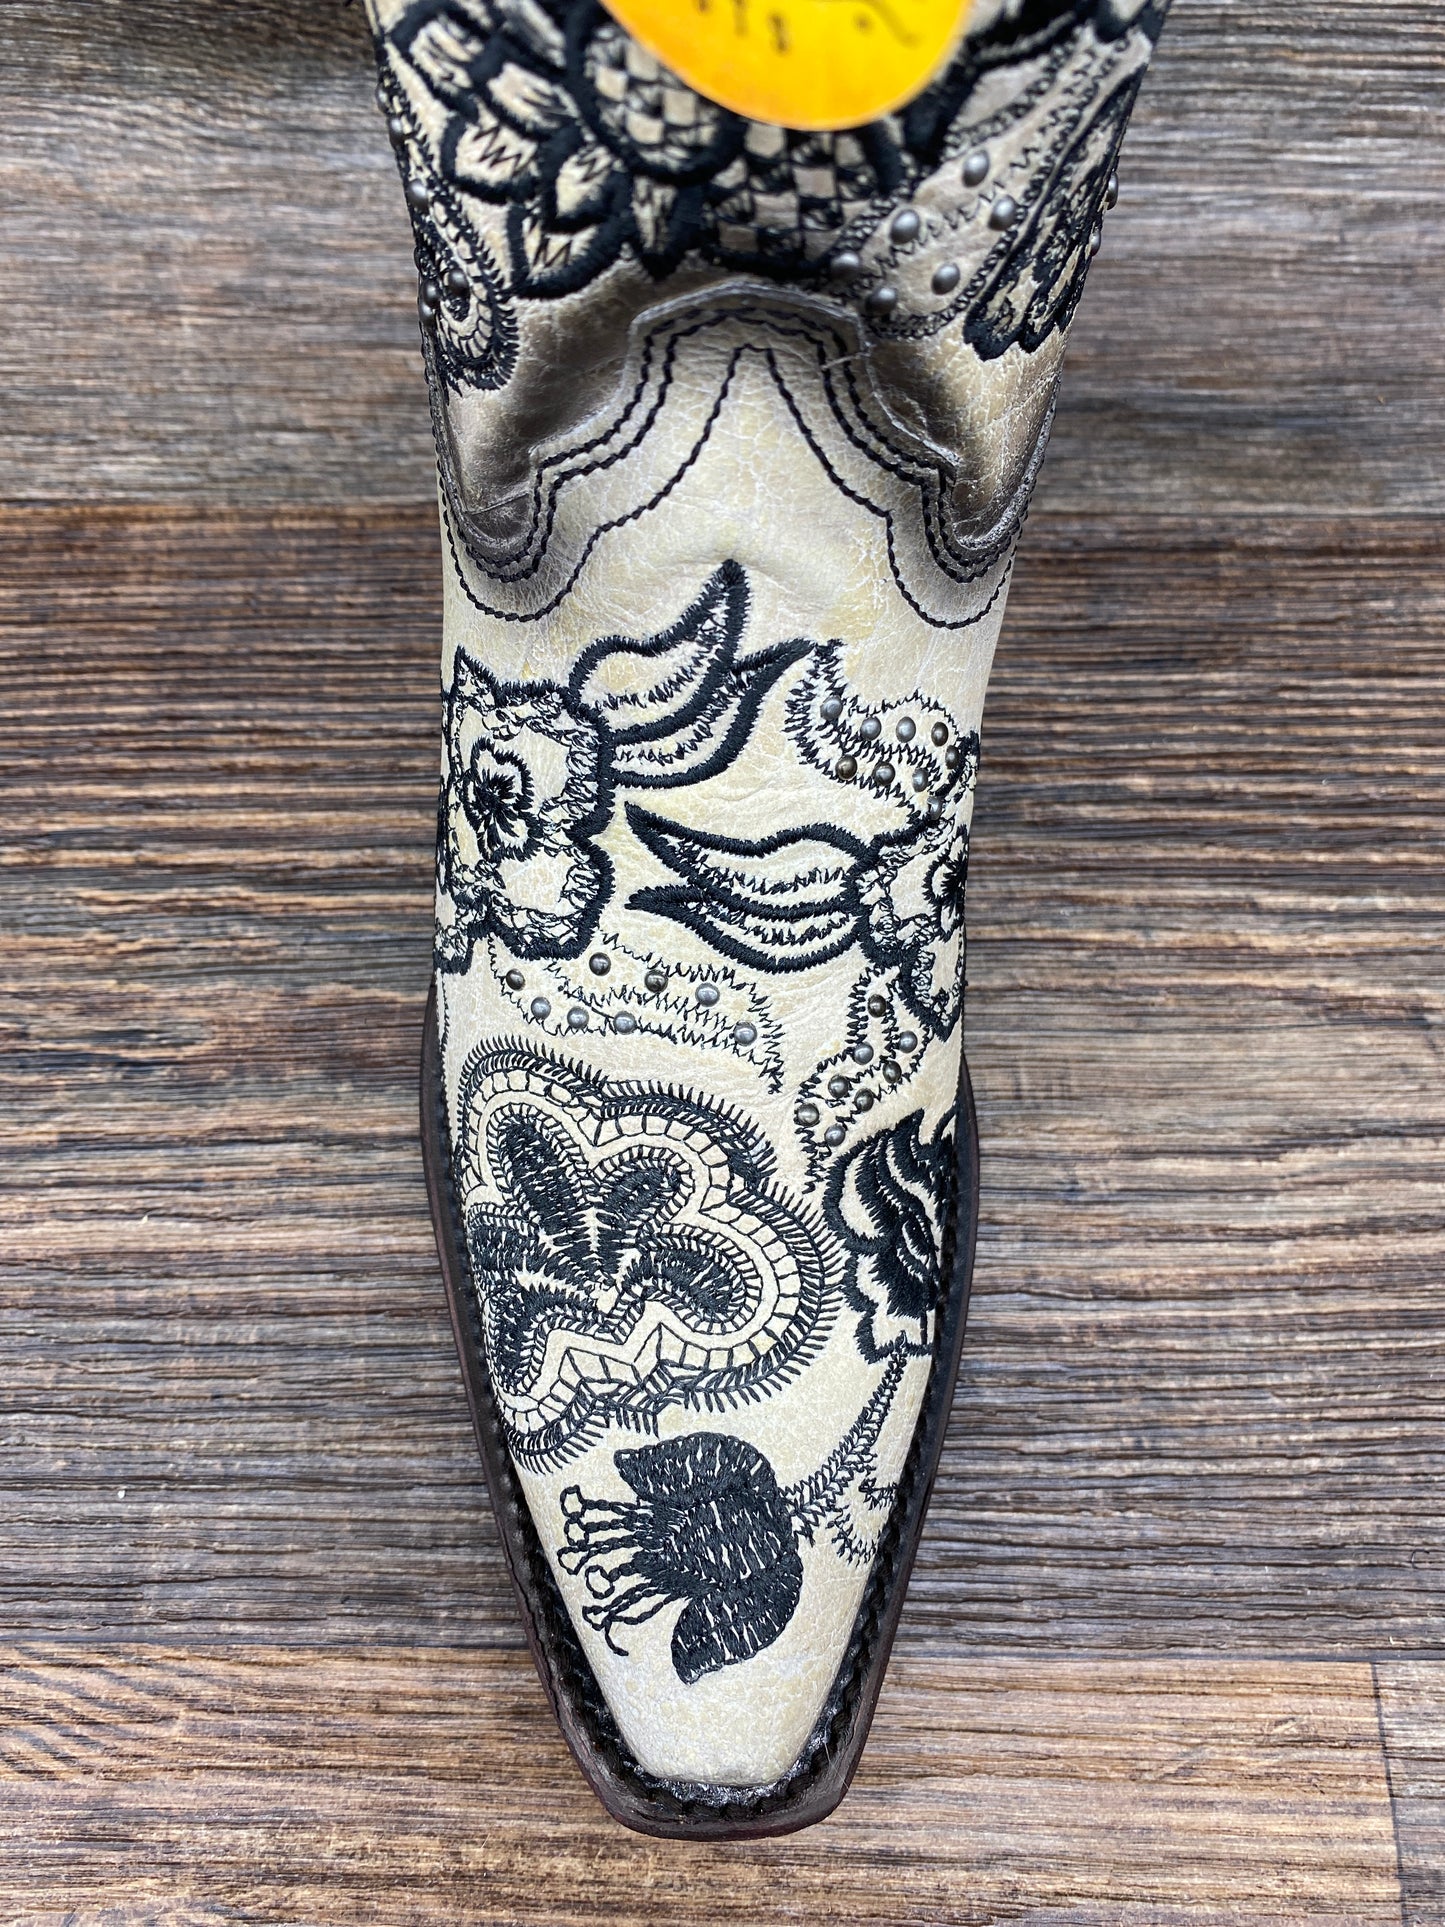 a4159 Ladies Black & White Embroidered Snip Toe Western Boot by Corral